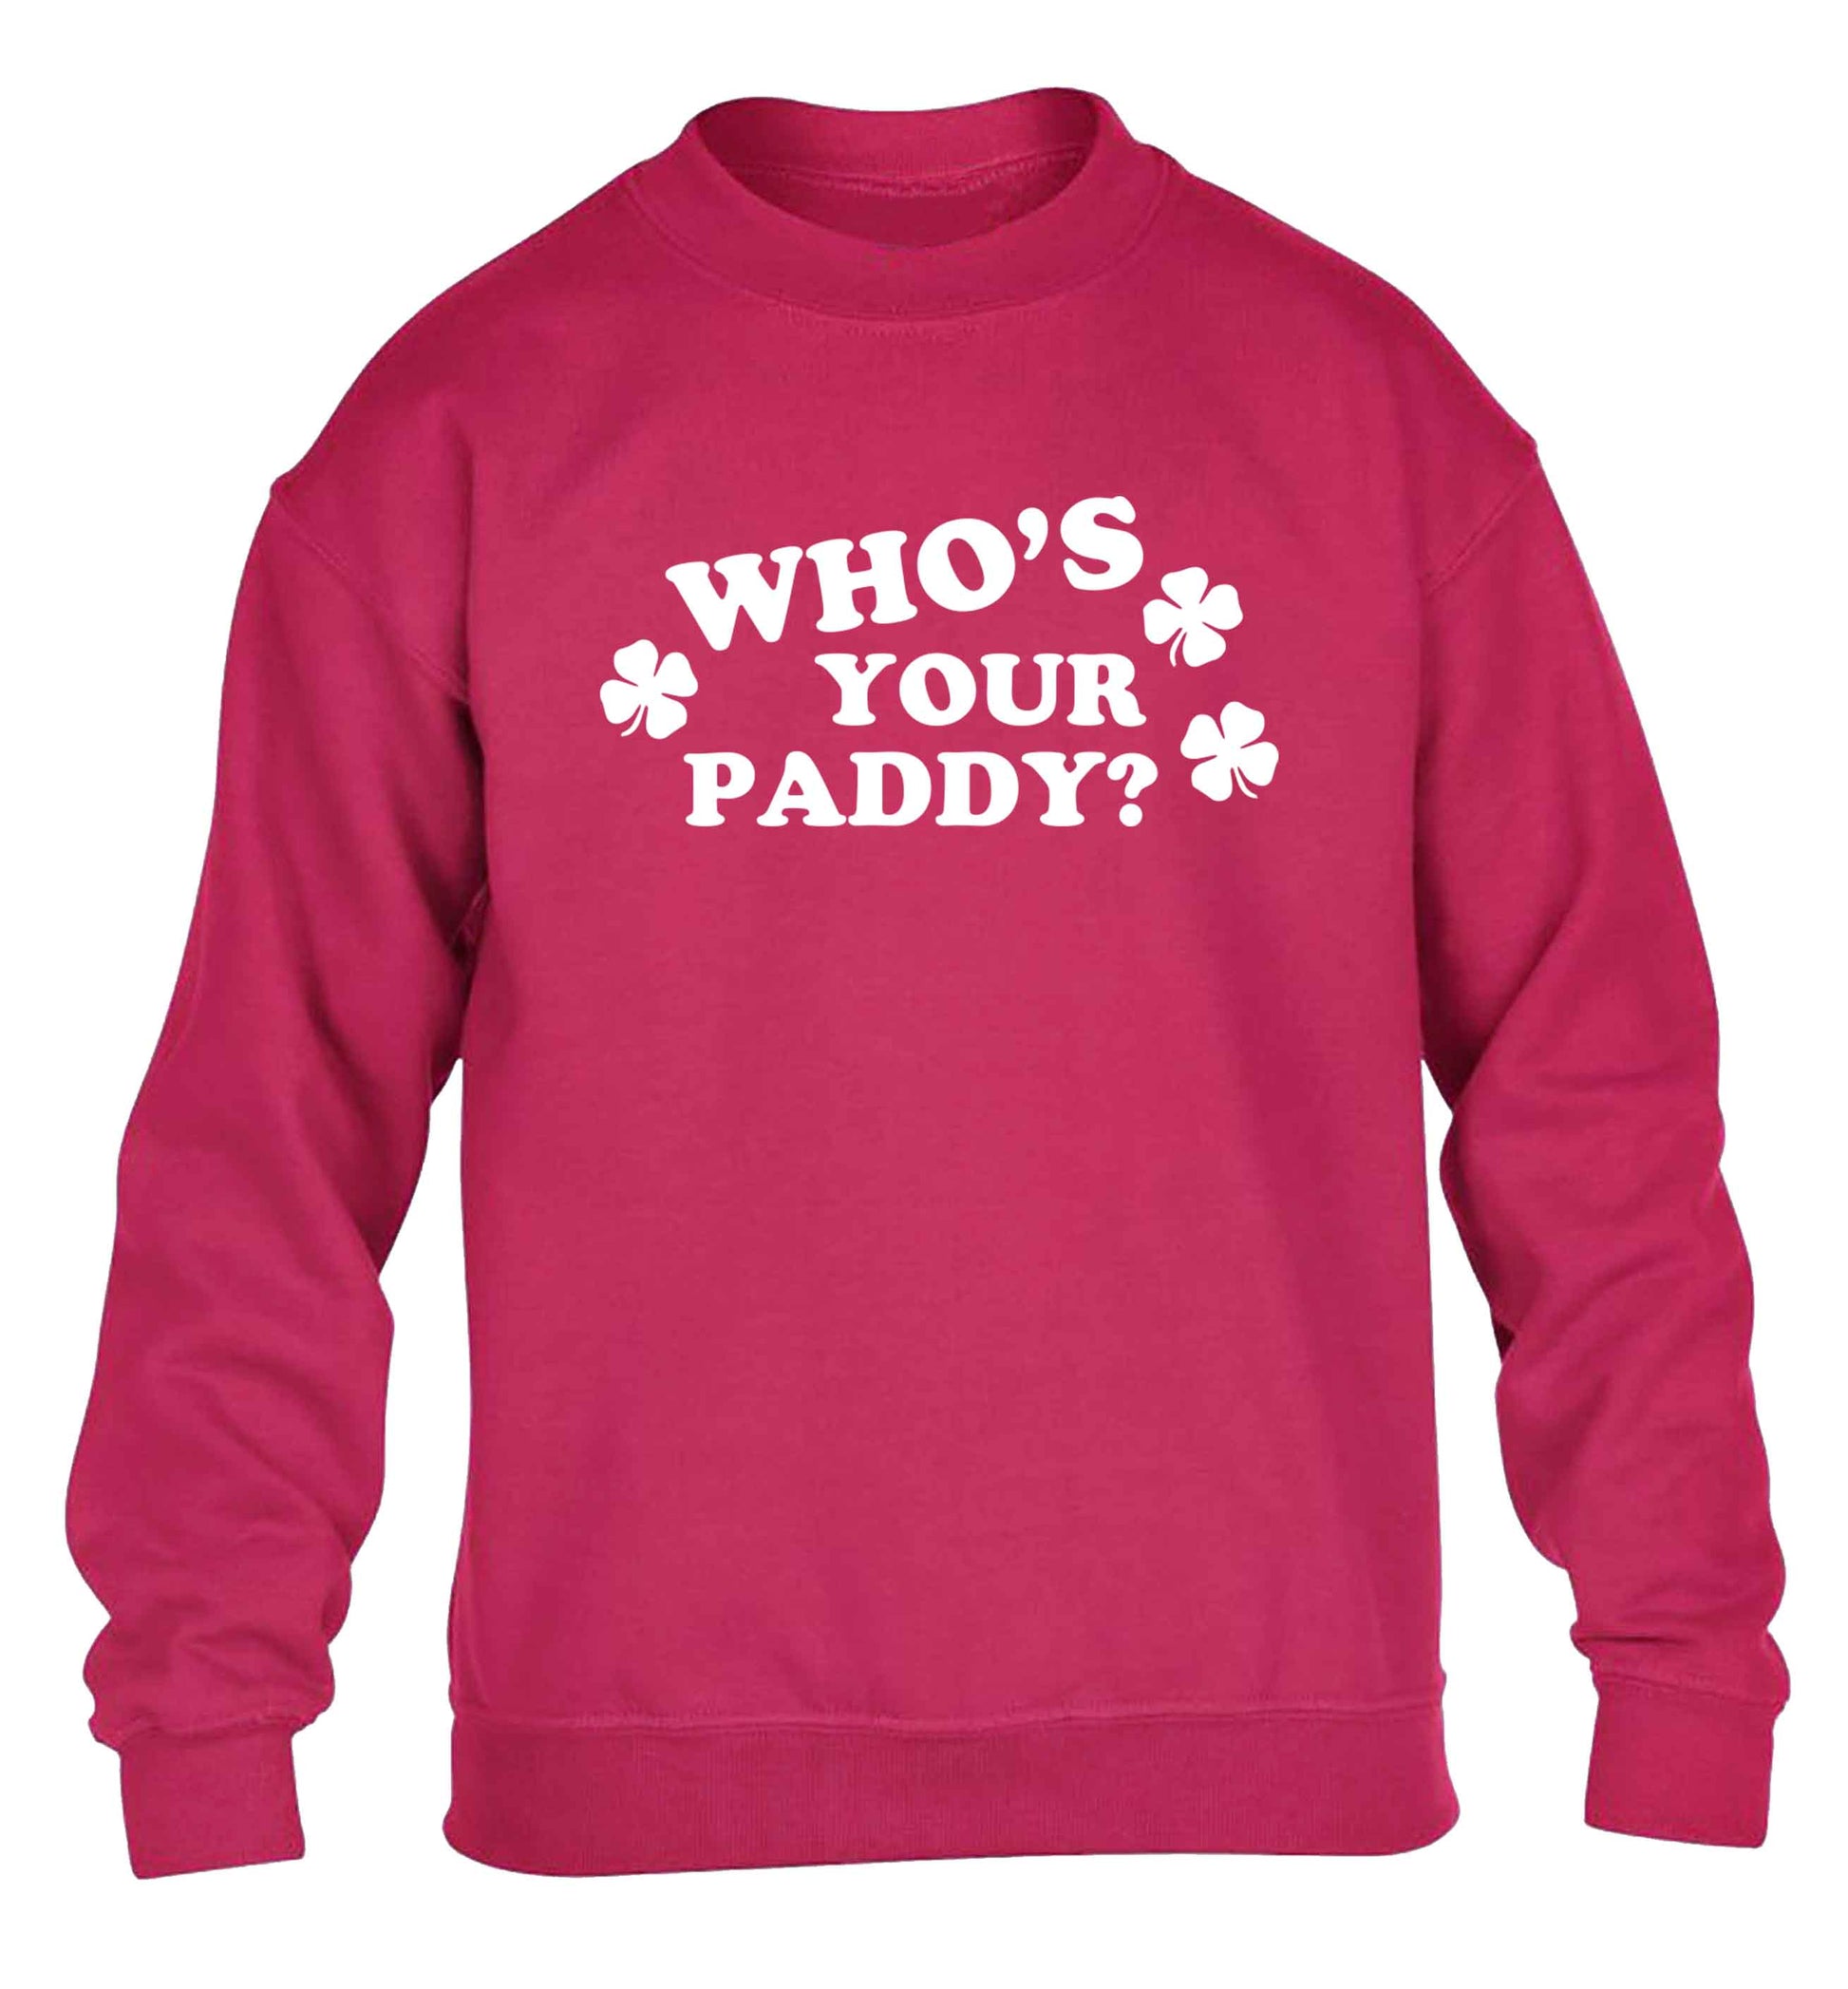 Who's your paddy? children's pink sweater 12-13 Years